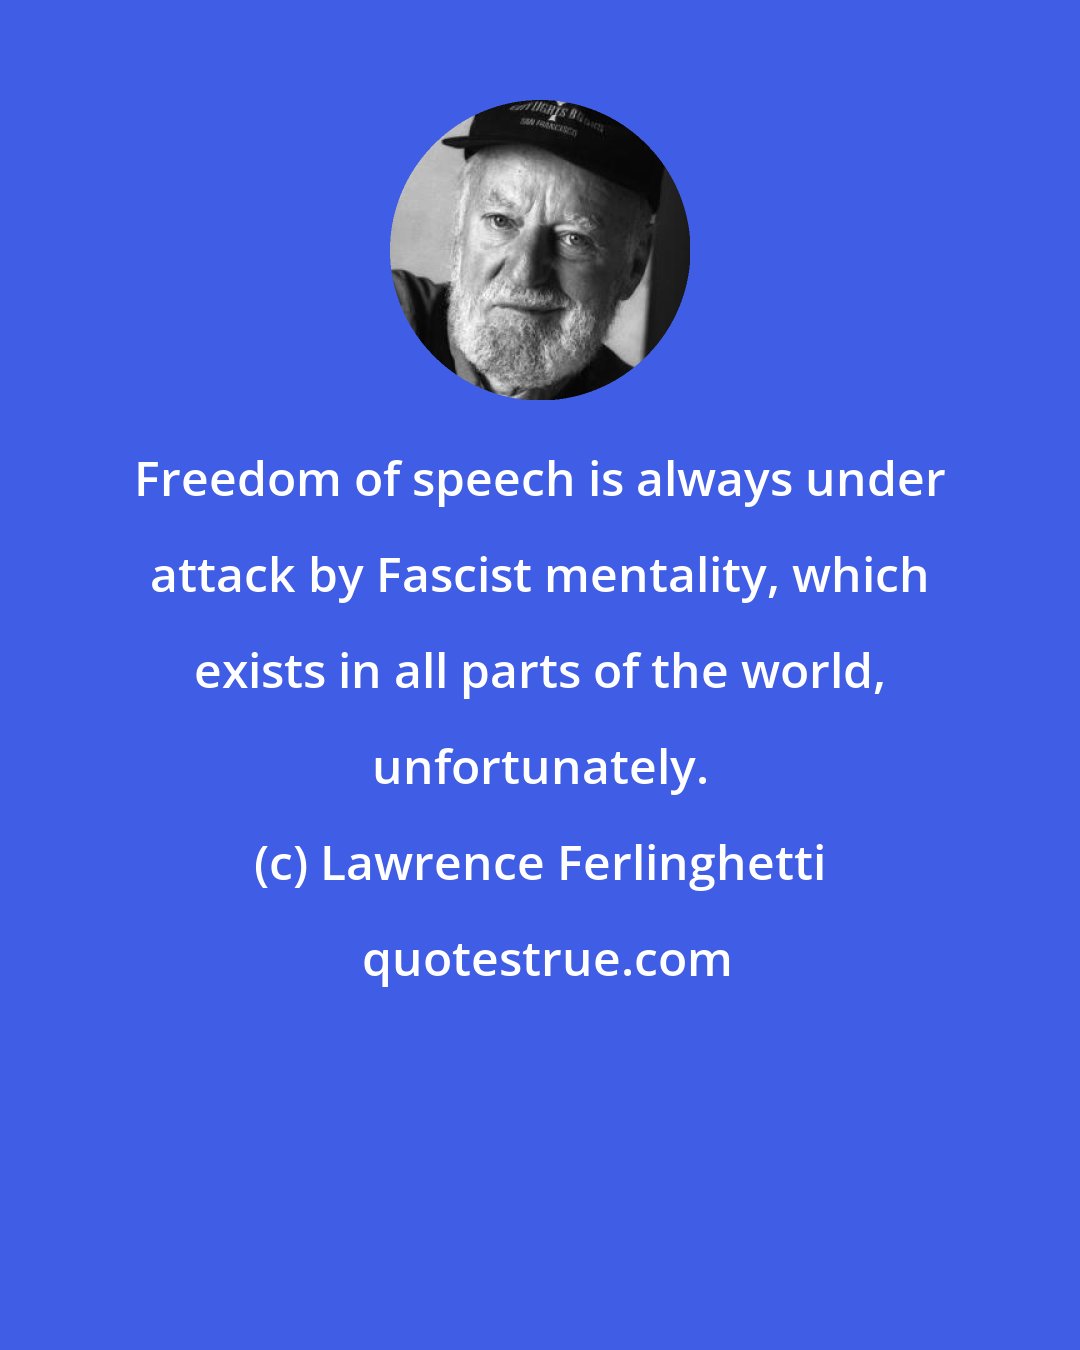 Lawrence Ferlinghetti: Freedom of speech is always under attack by Fascist mentality, which exists in all parts of the world, unfortunately.